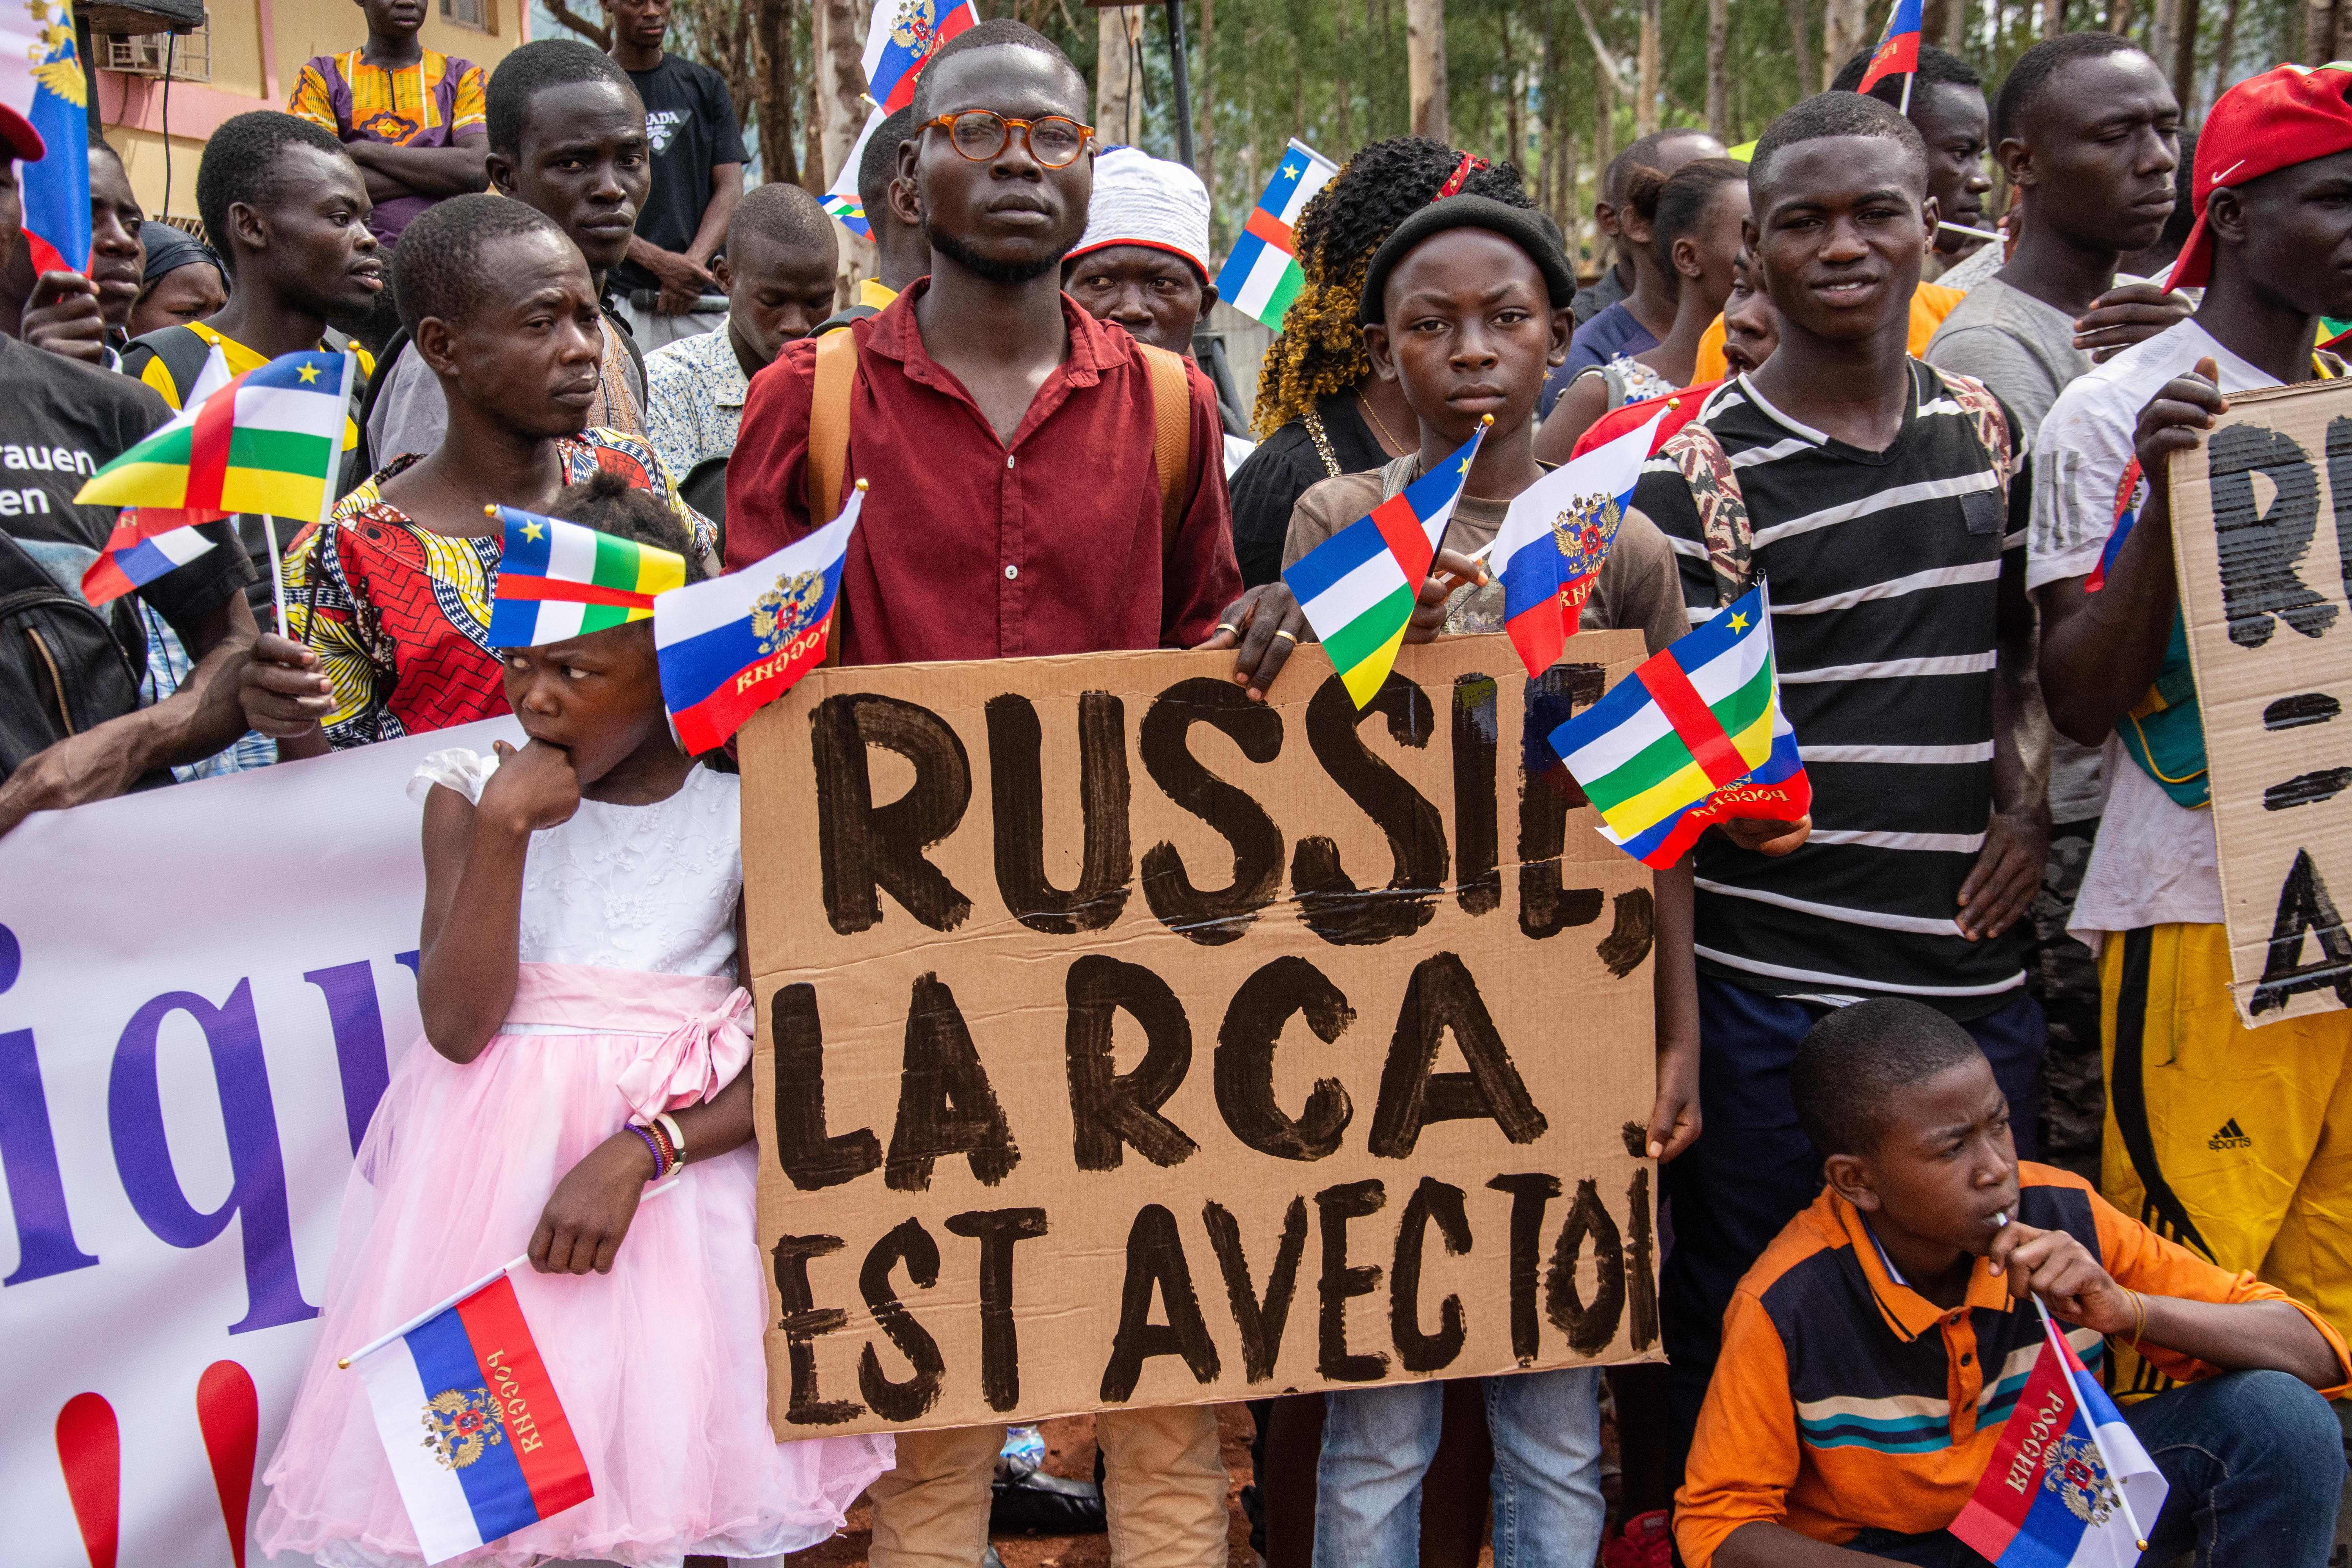 File photo: Demonstrators holding placards with pro-Russian slogans gather in Bangui, Central African Republic, 5 March 2022